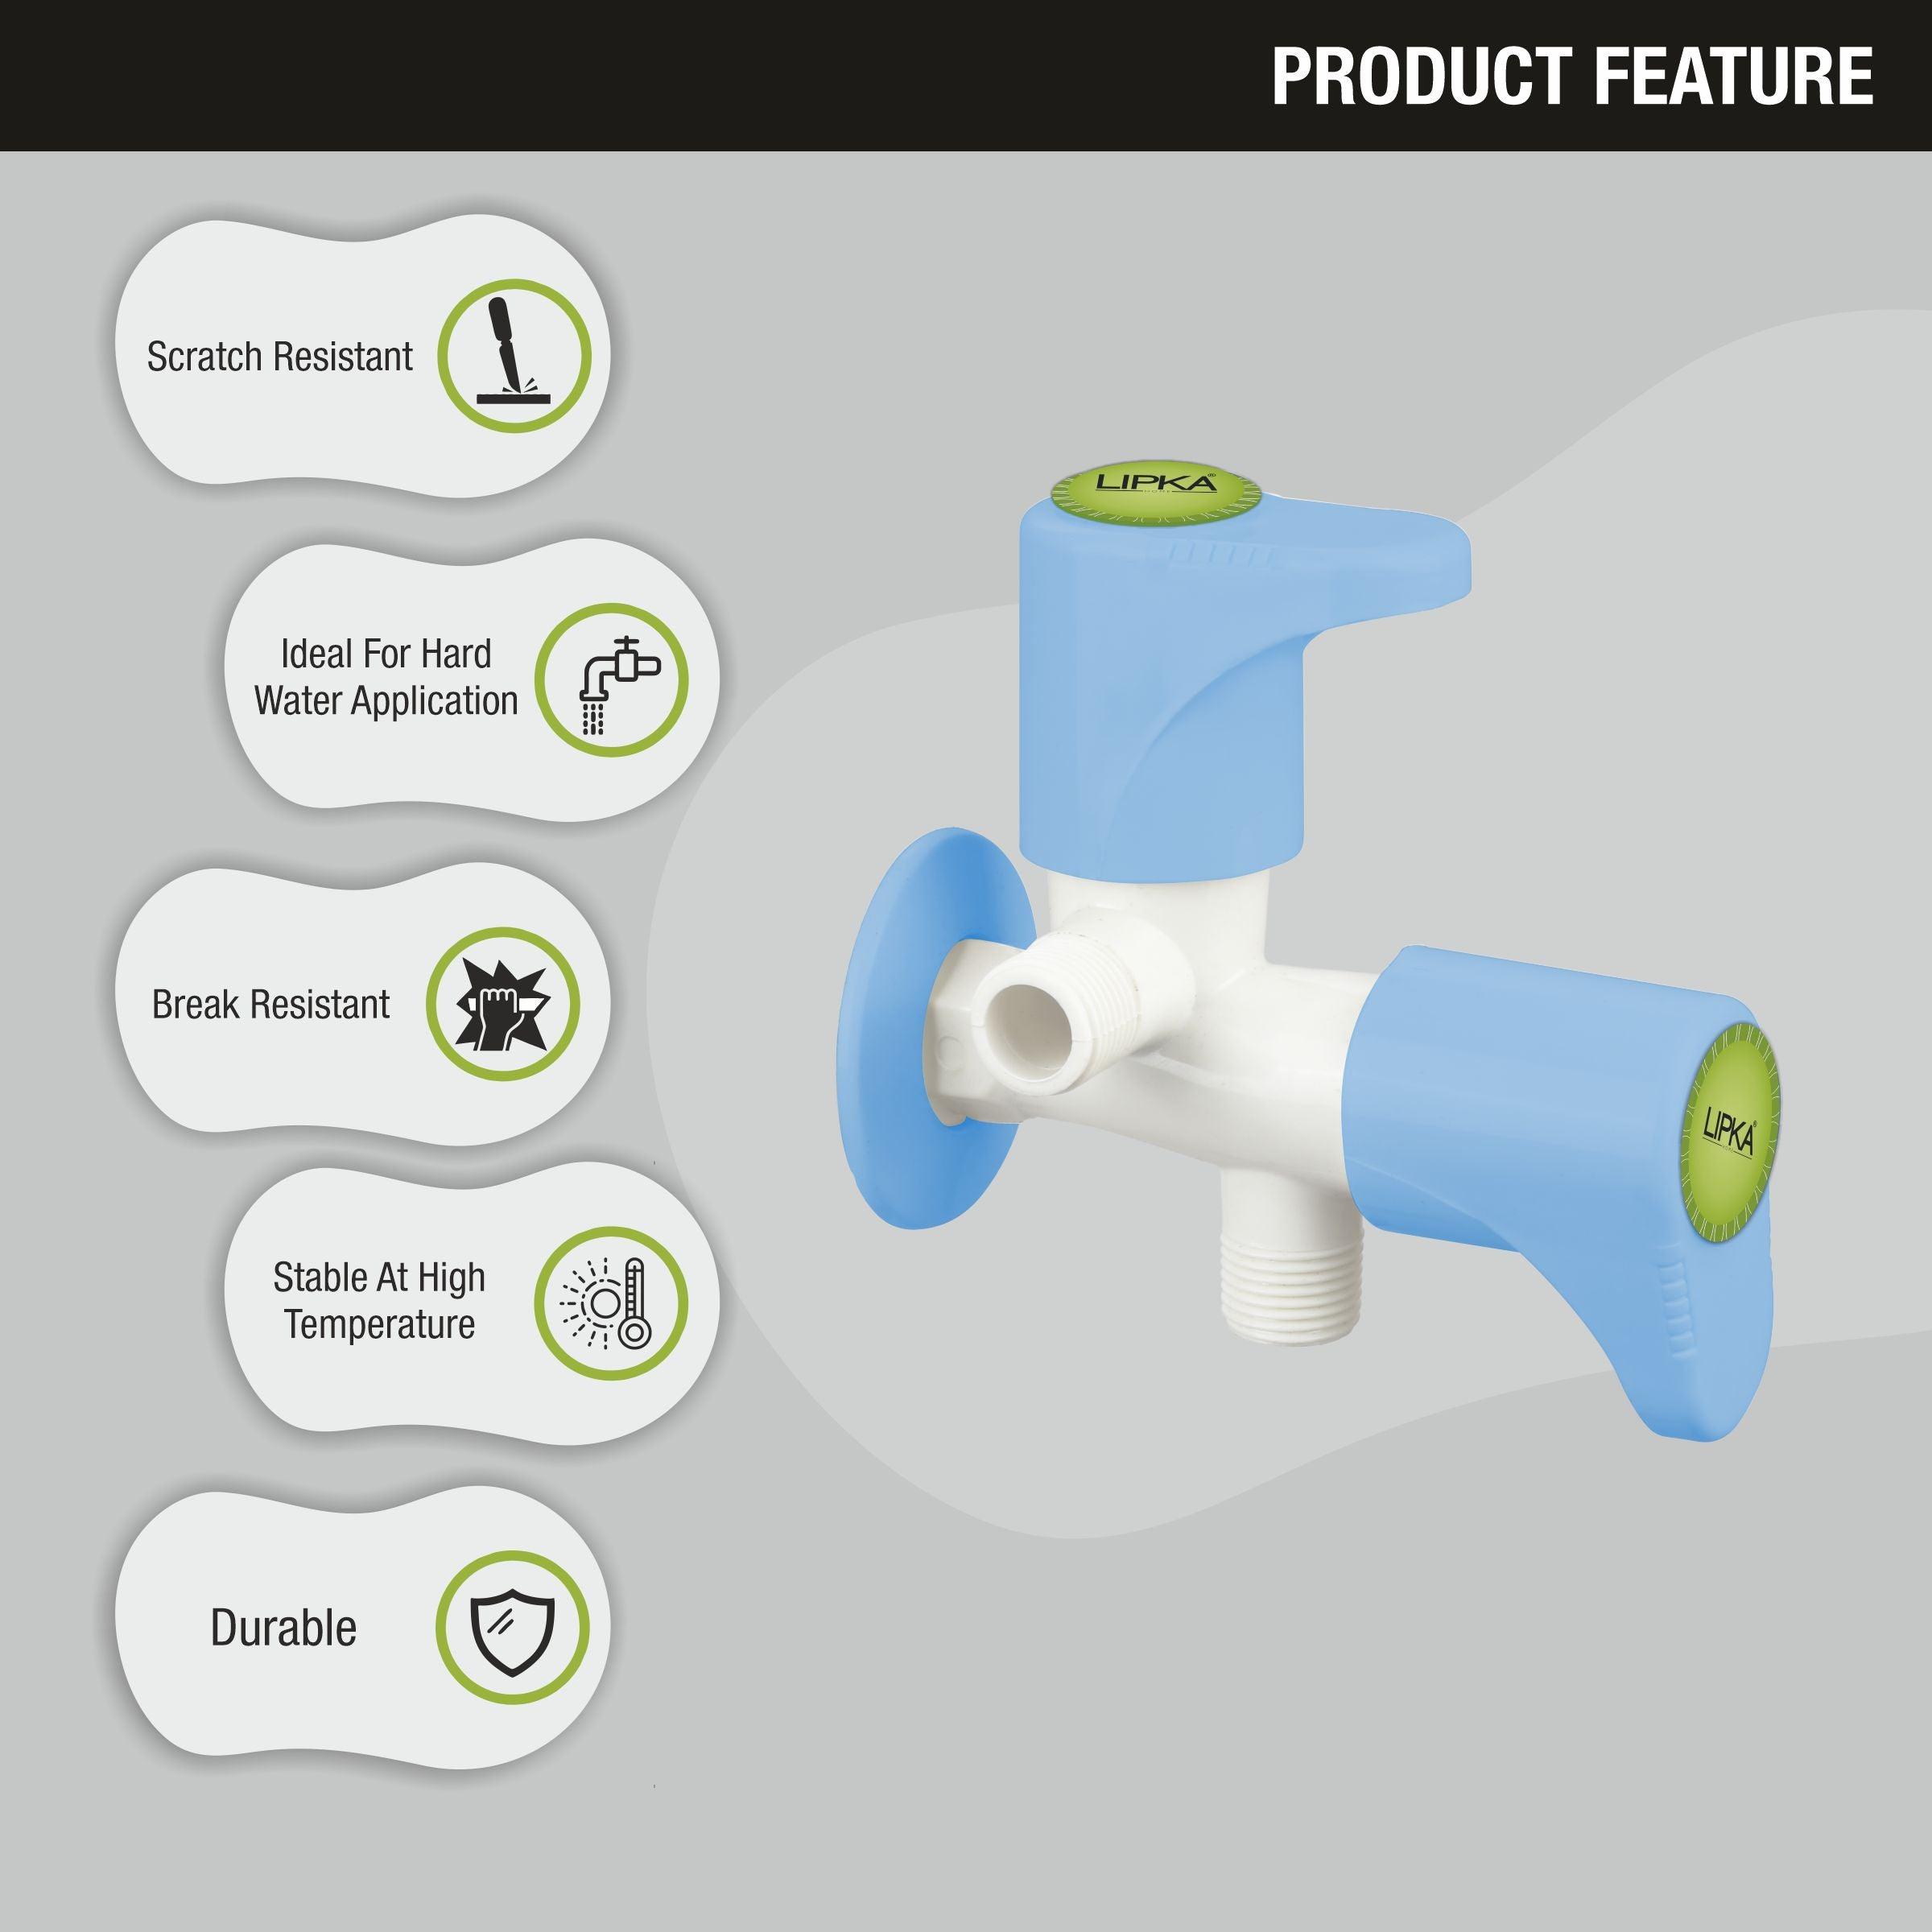 Glory Two Way Angle Valve PTMT Faucet (Double Handle) features